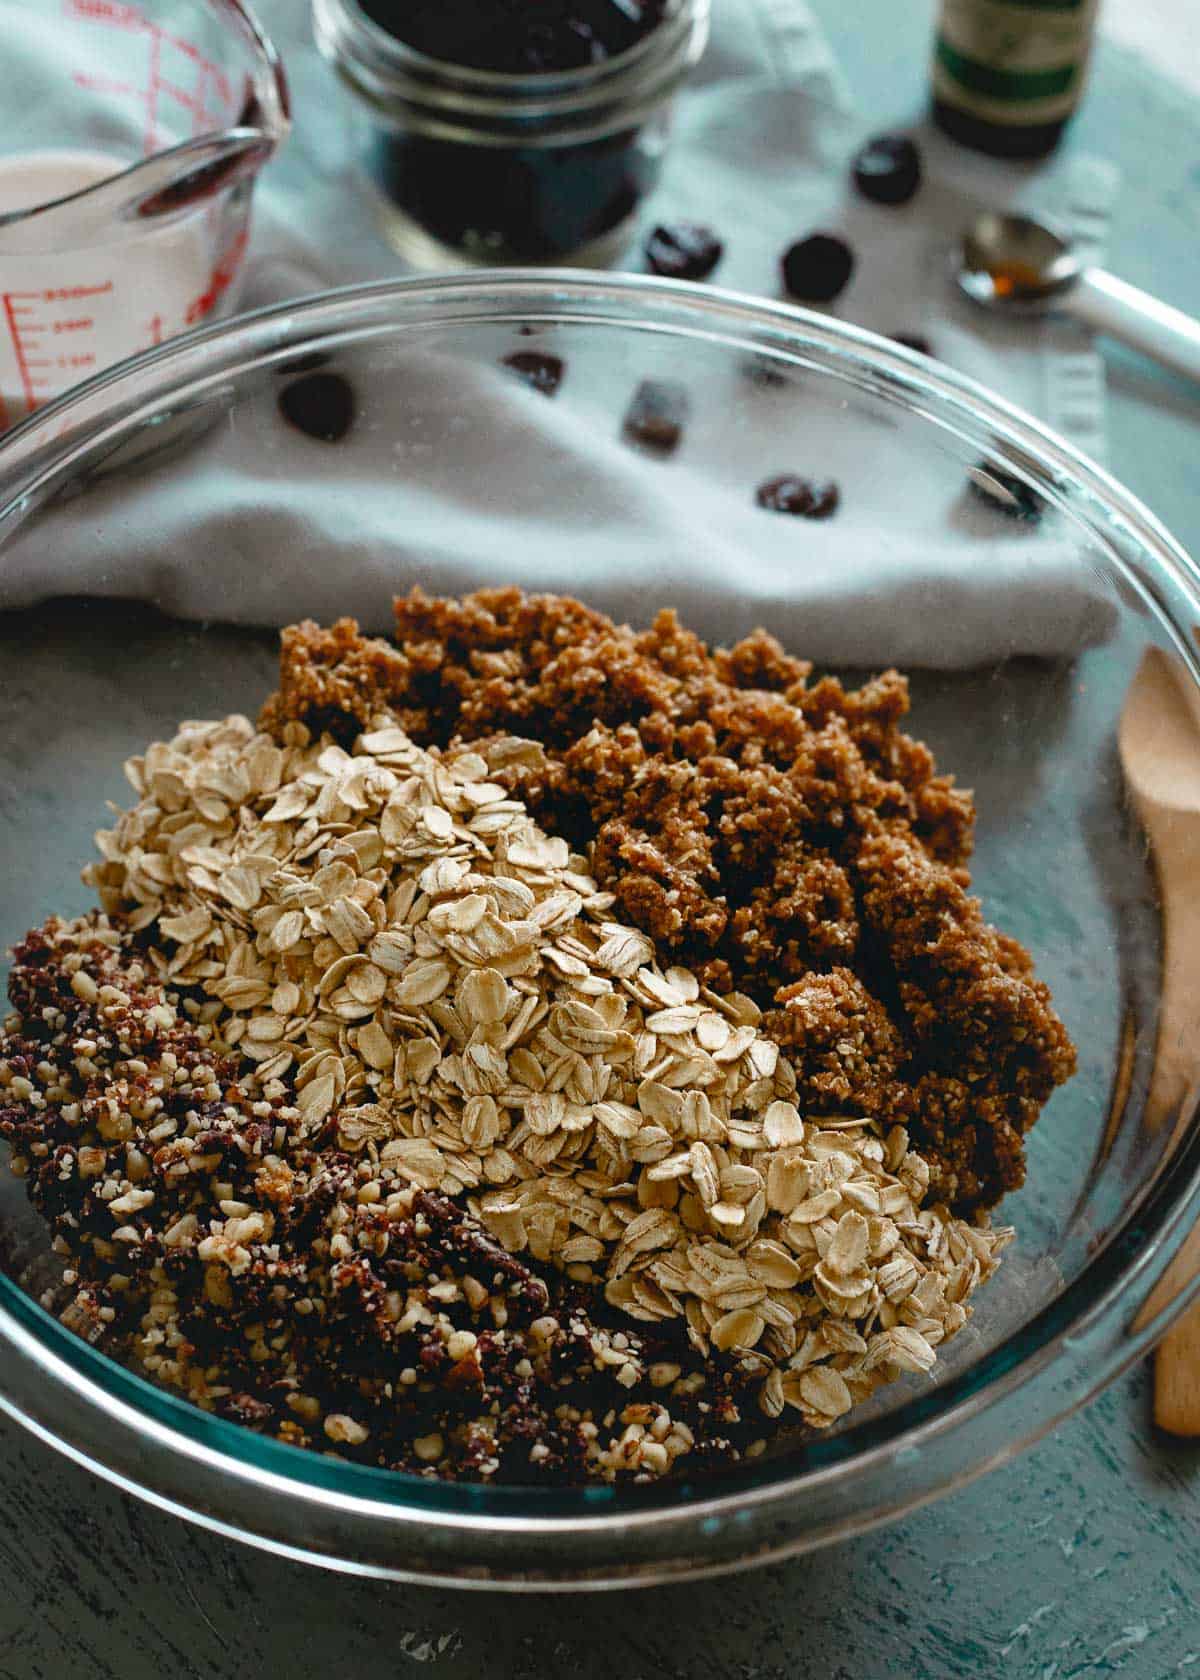 Montmorency tart cherries give these chewy oat bars a sweet and tangy taste you'll love.